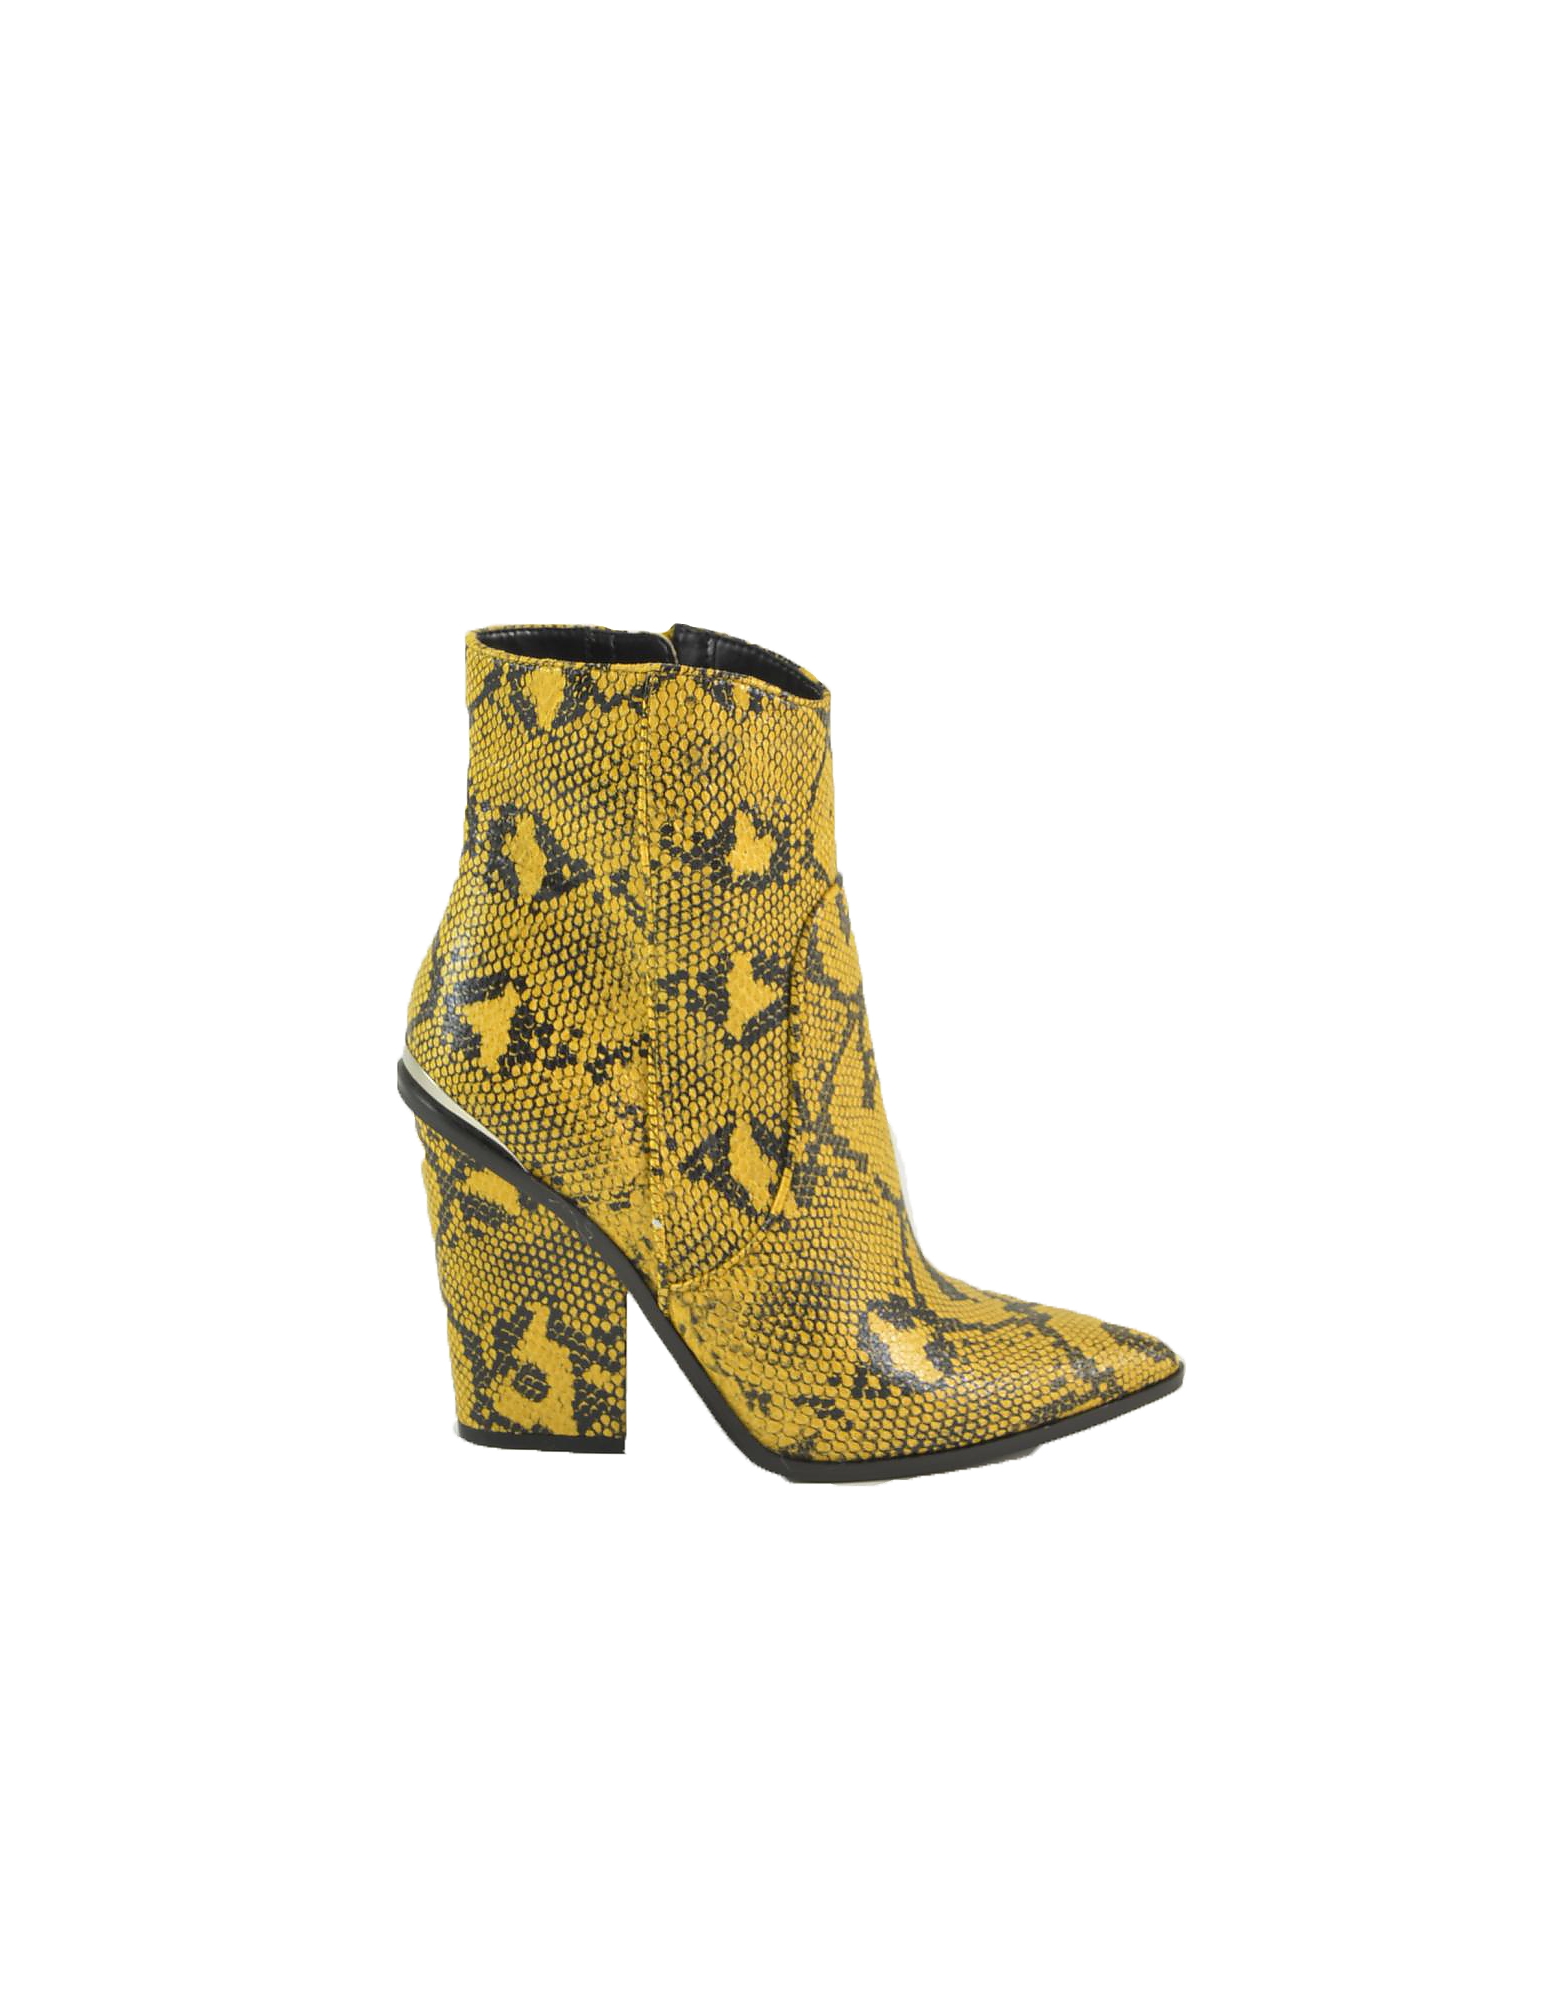 Steve Madden  Shoes Yellow Snake Printed Leather Cowboy Booties